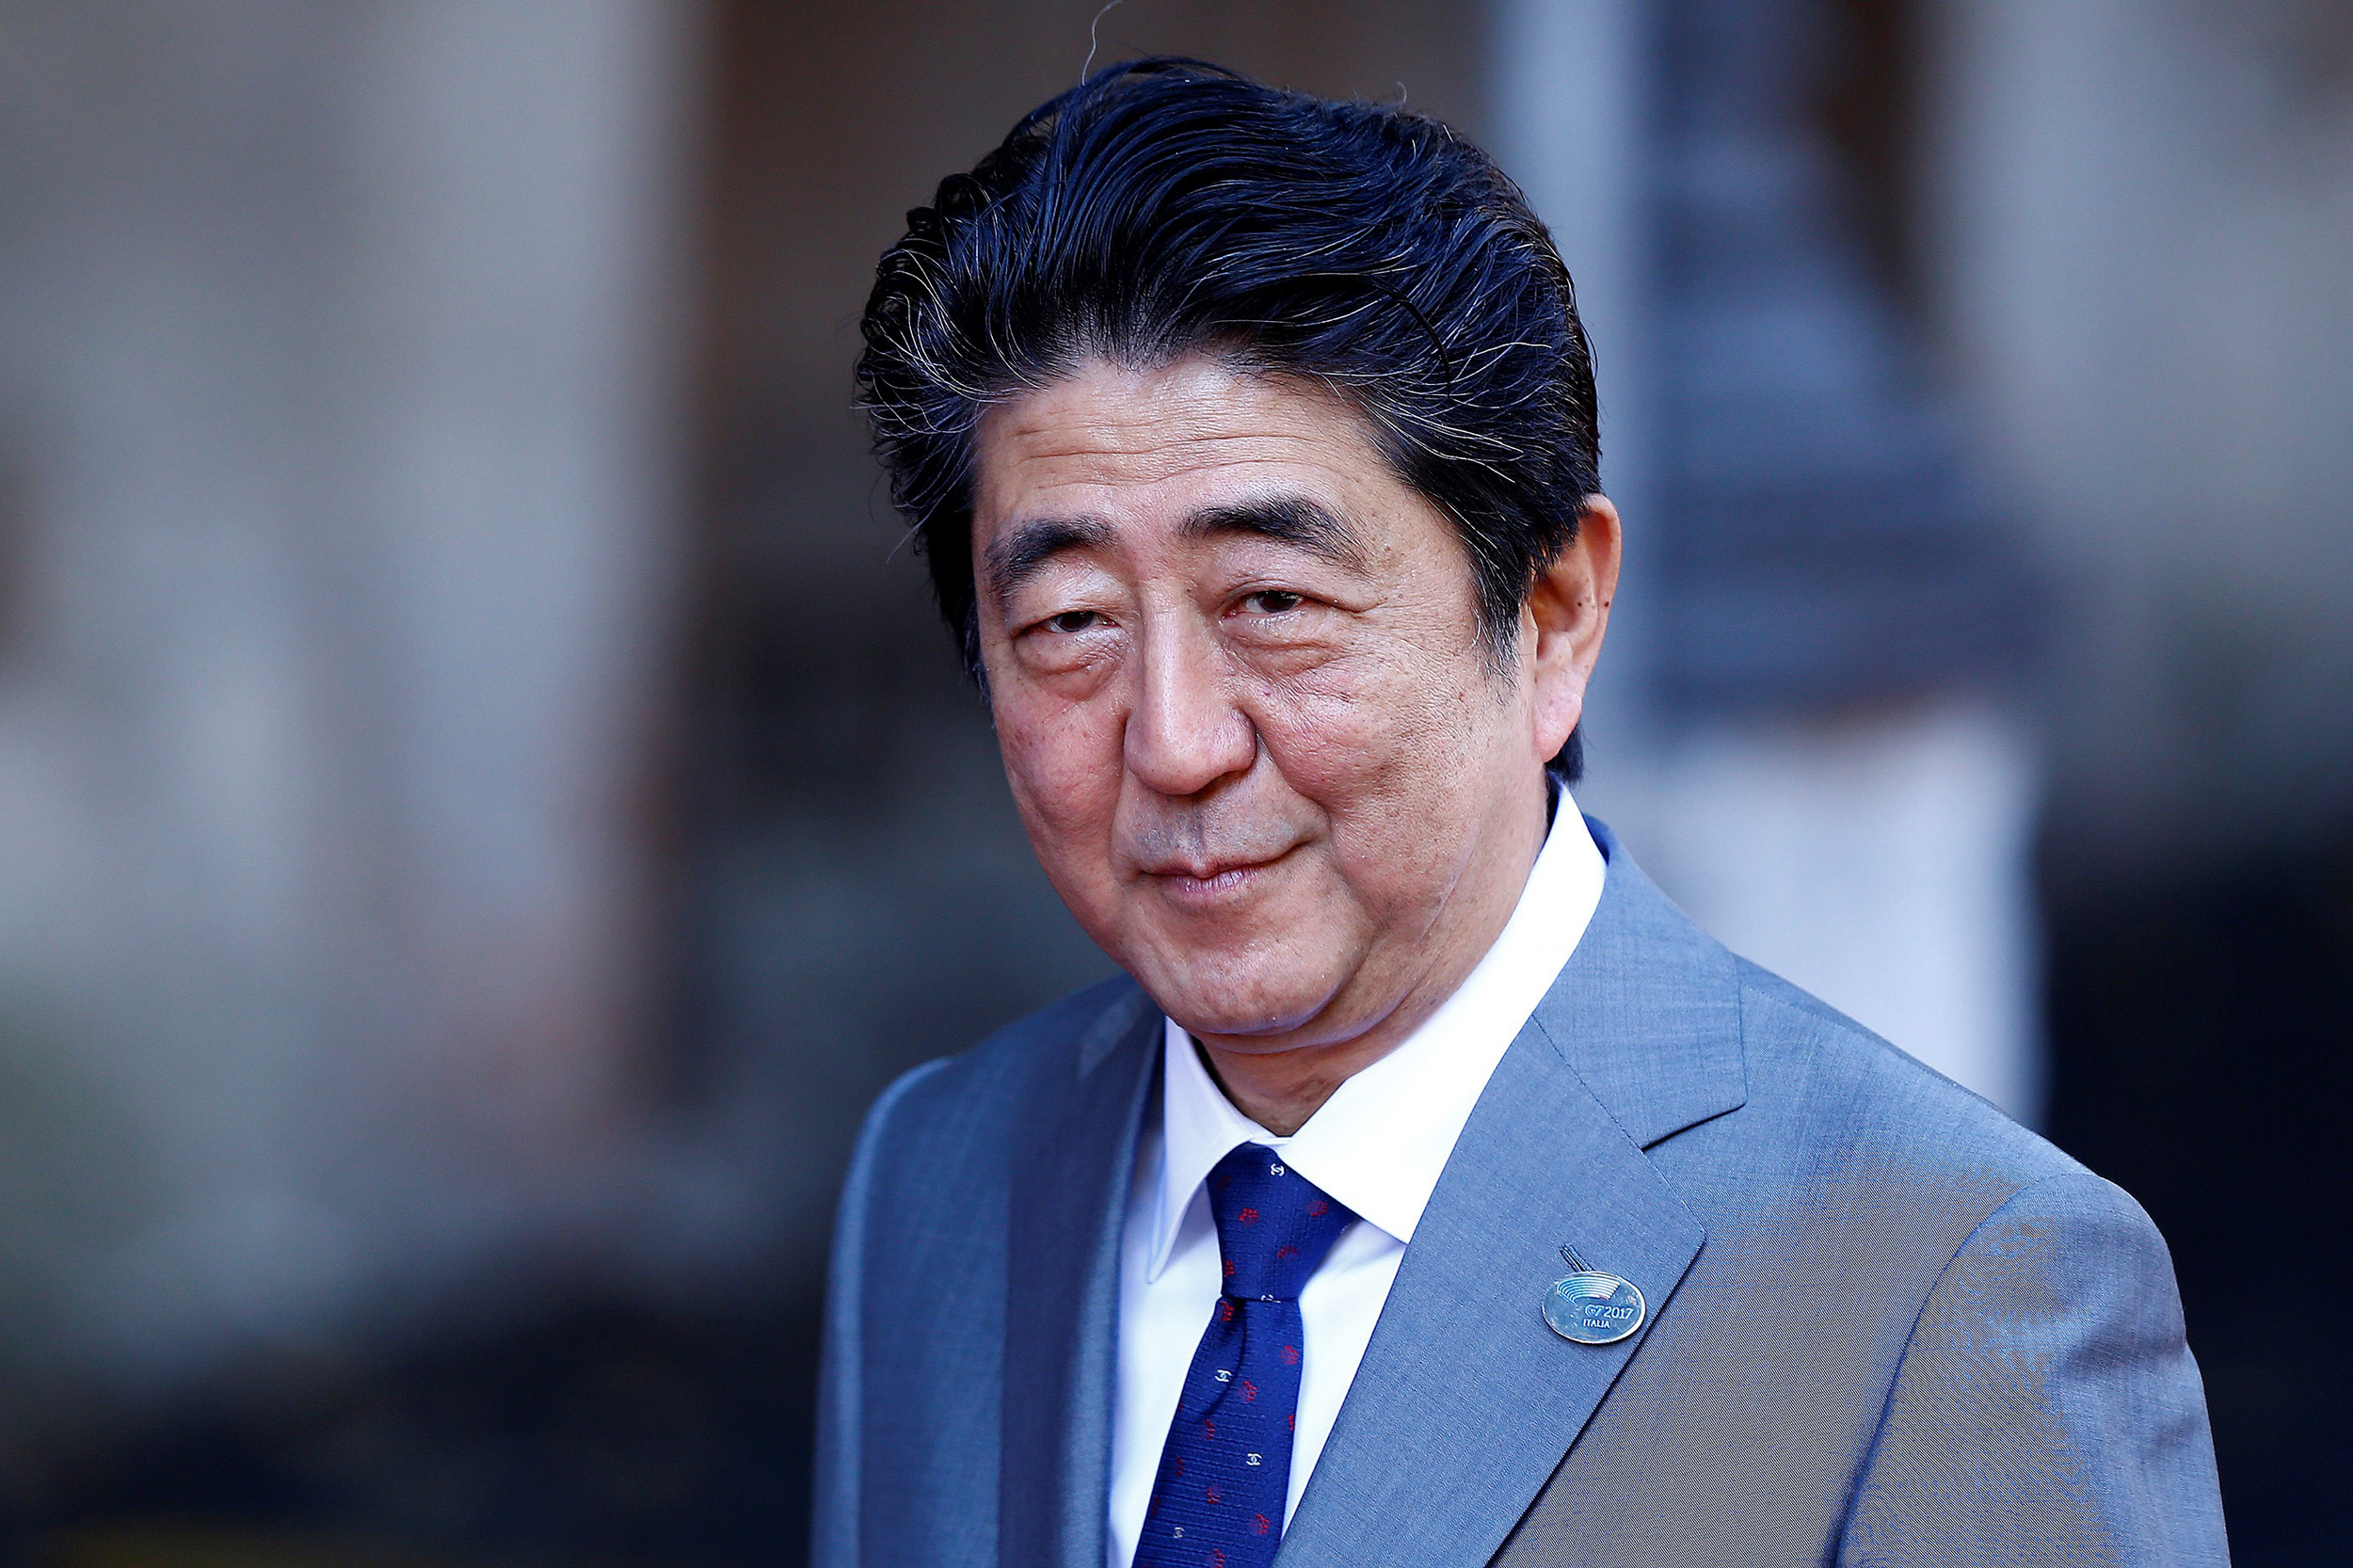 Shinzo Abe biography: Who was former Japanese leader?